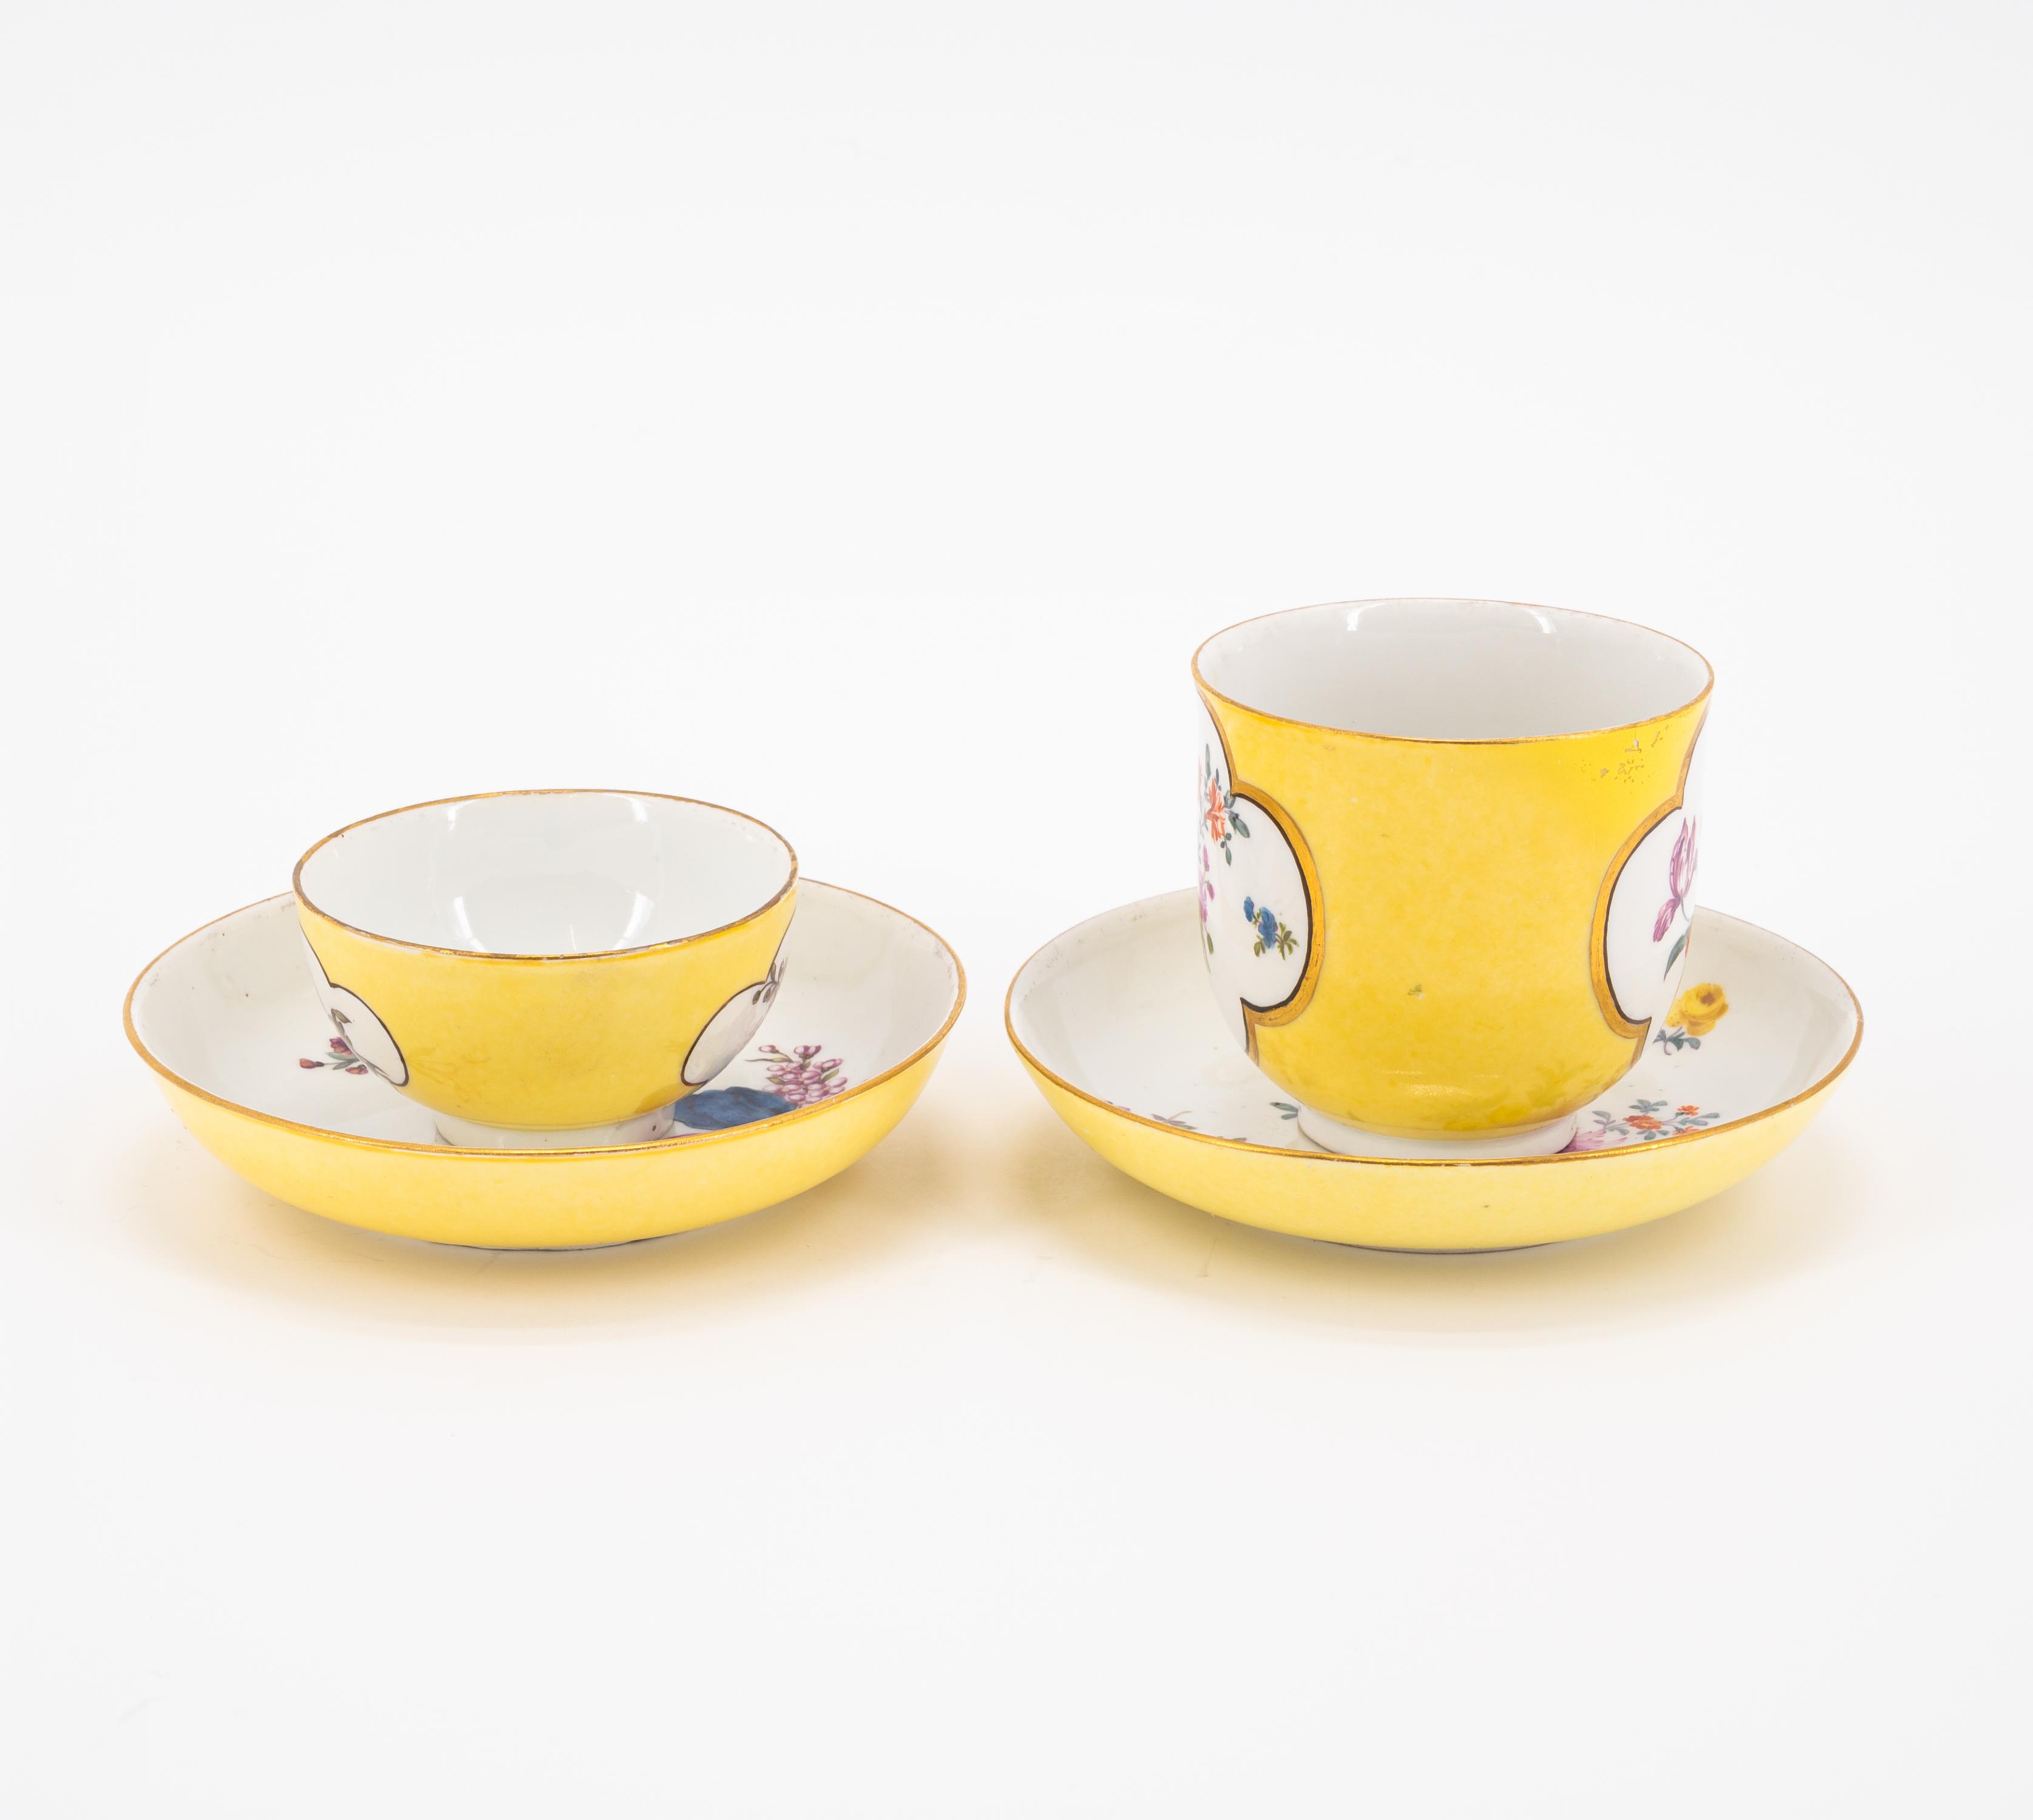 PORCELAIN TEA POT, TWO CUPS AND SAUCERS WITH YELLOW GROUND AND OMBRÉ FLORAL PAINTING - Image 4 of 11